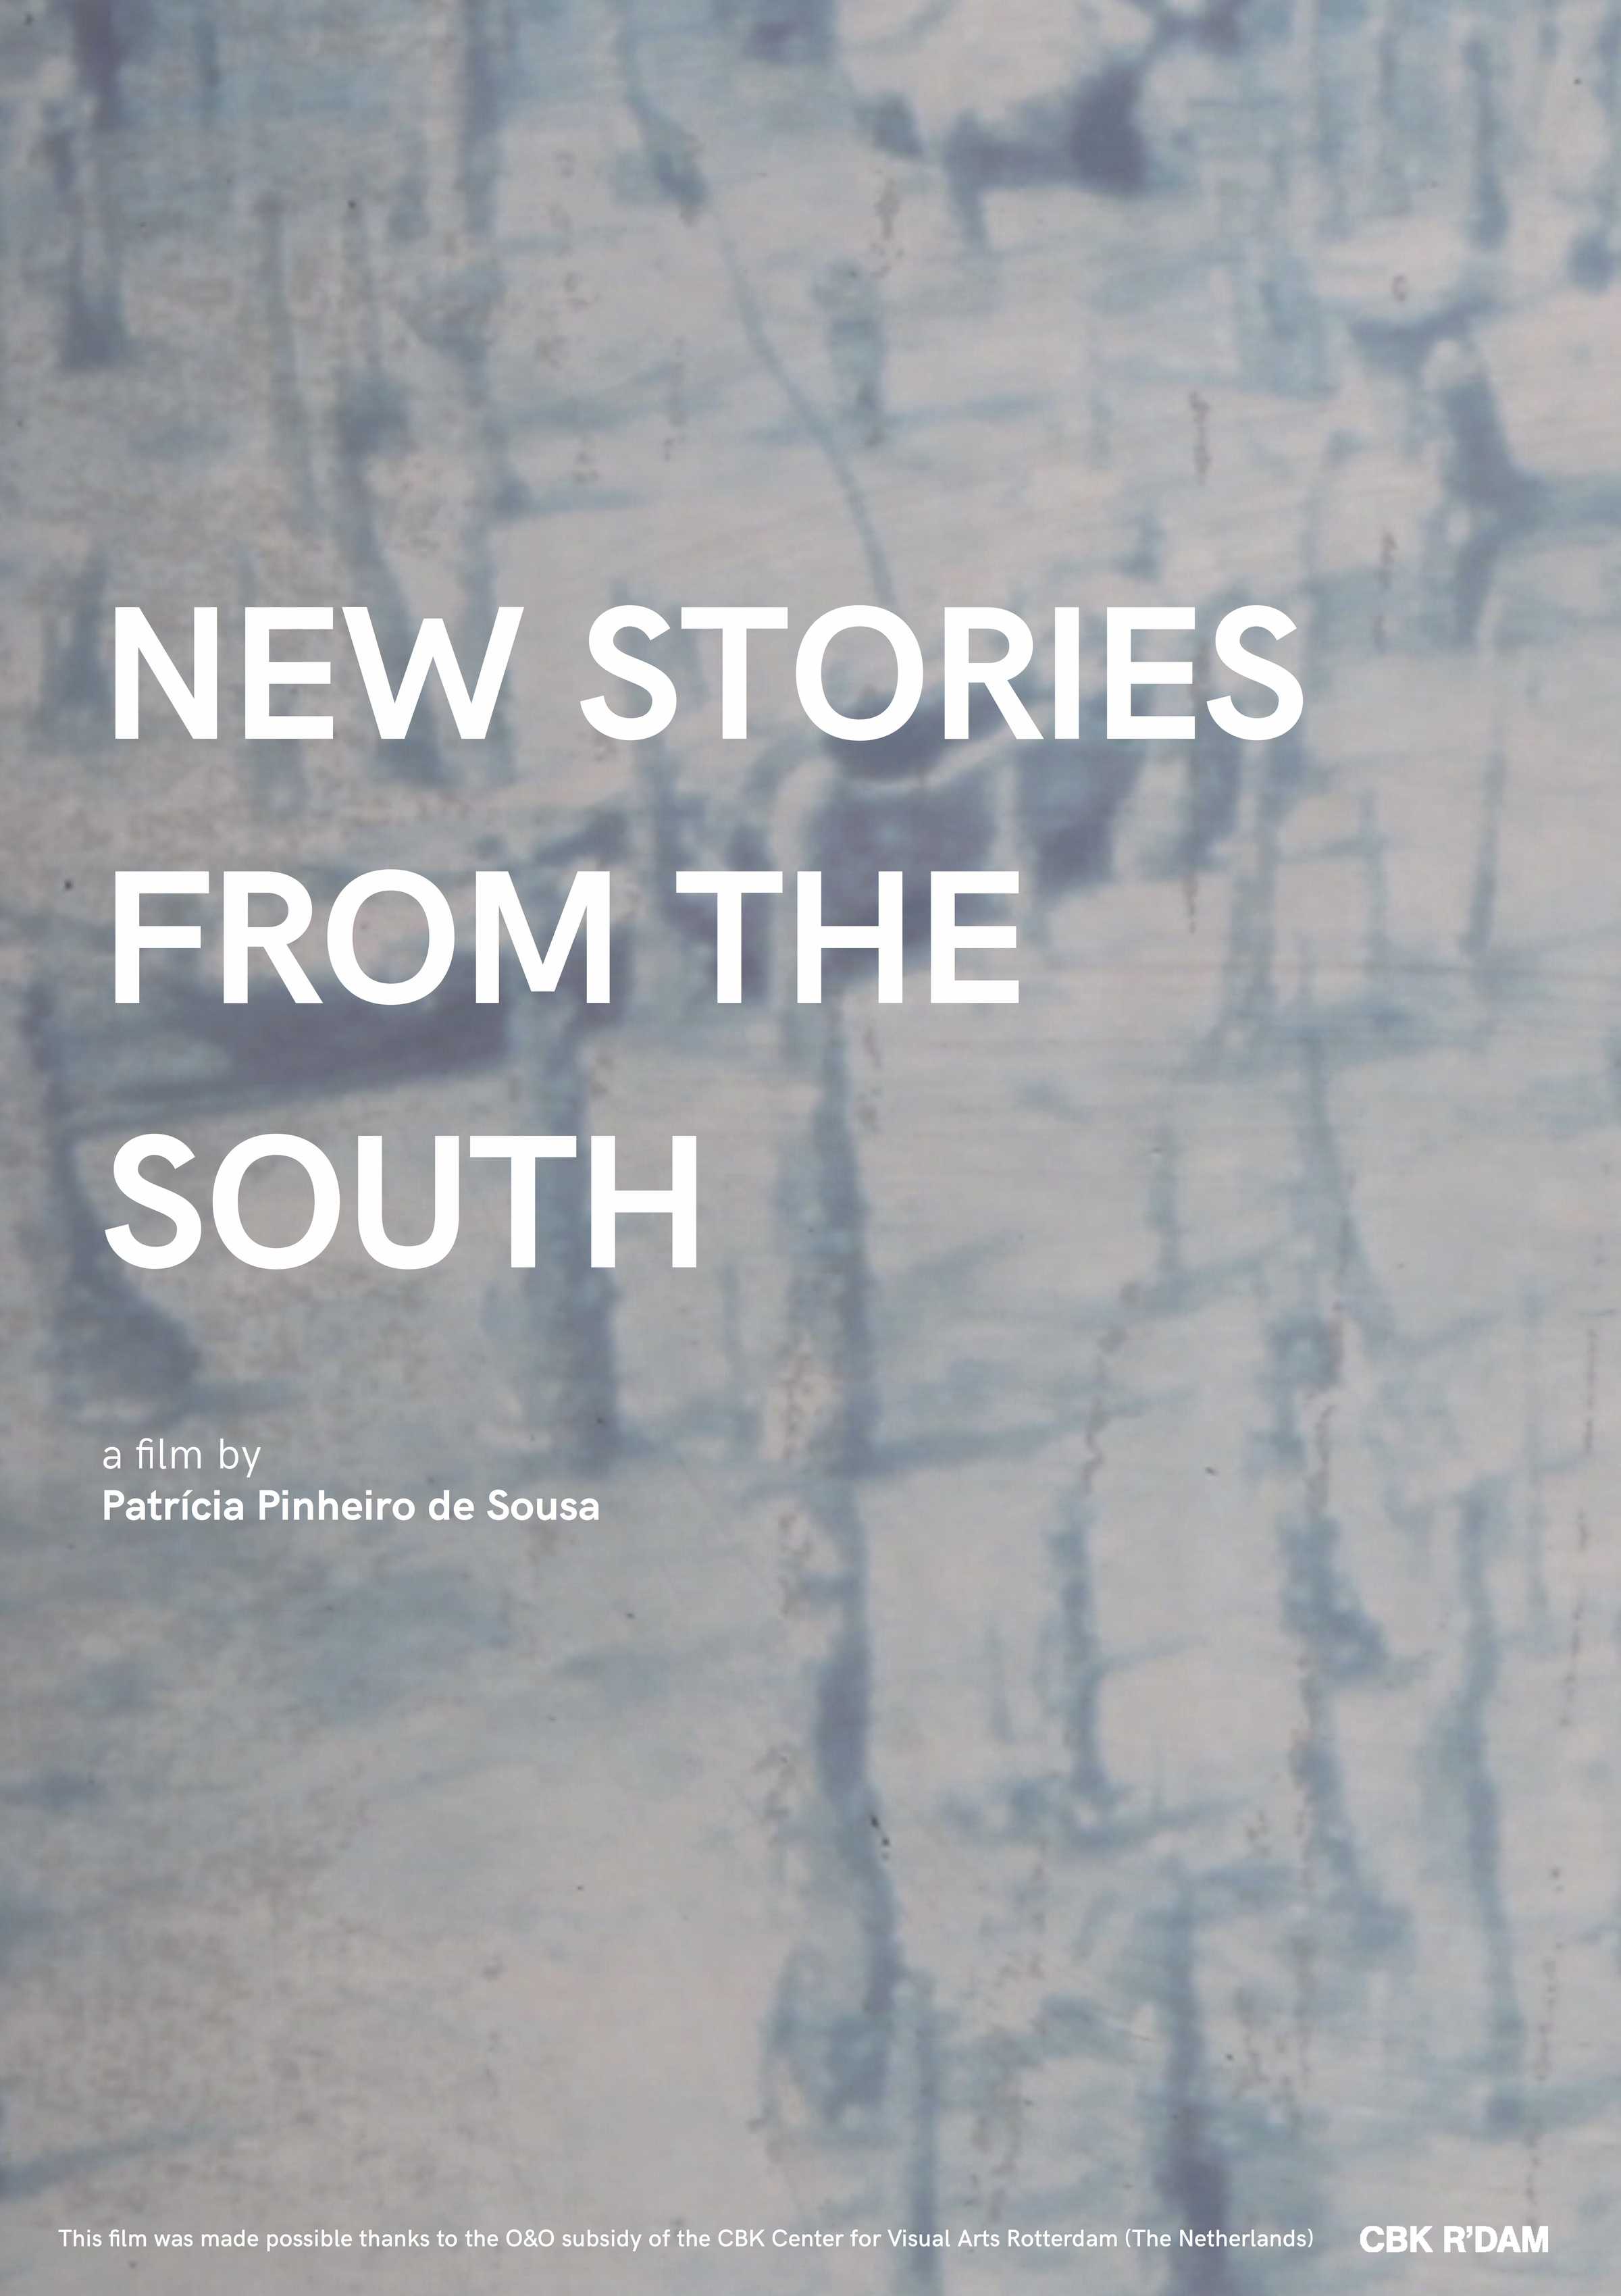 "New Stories From The South"